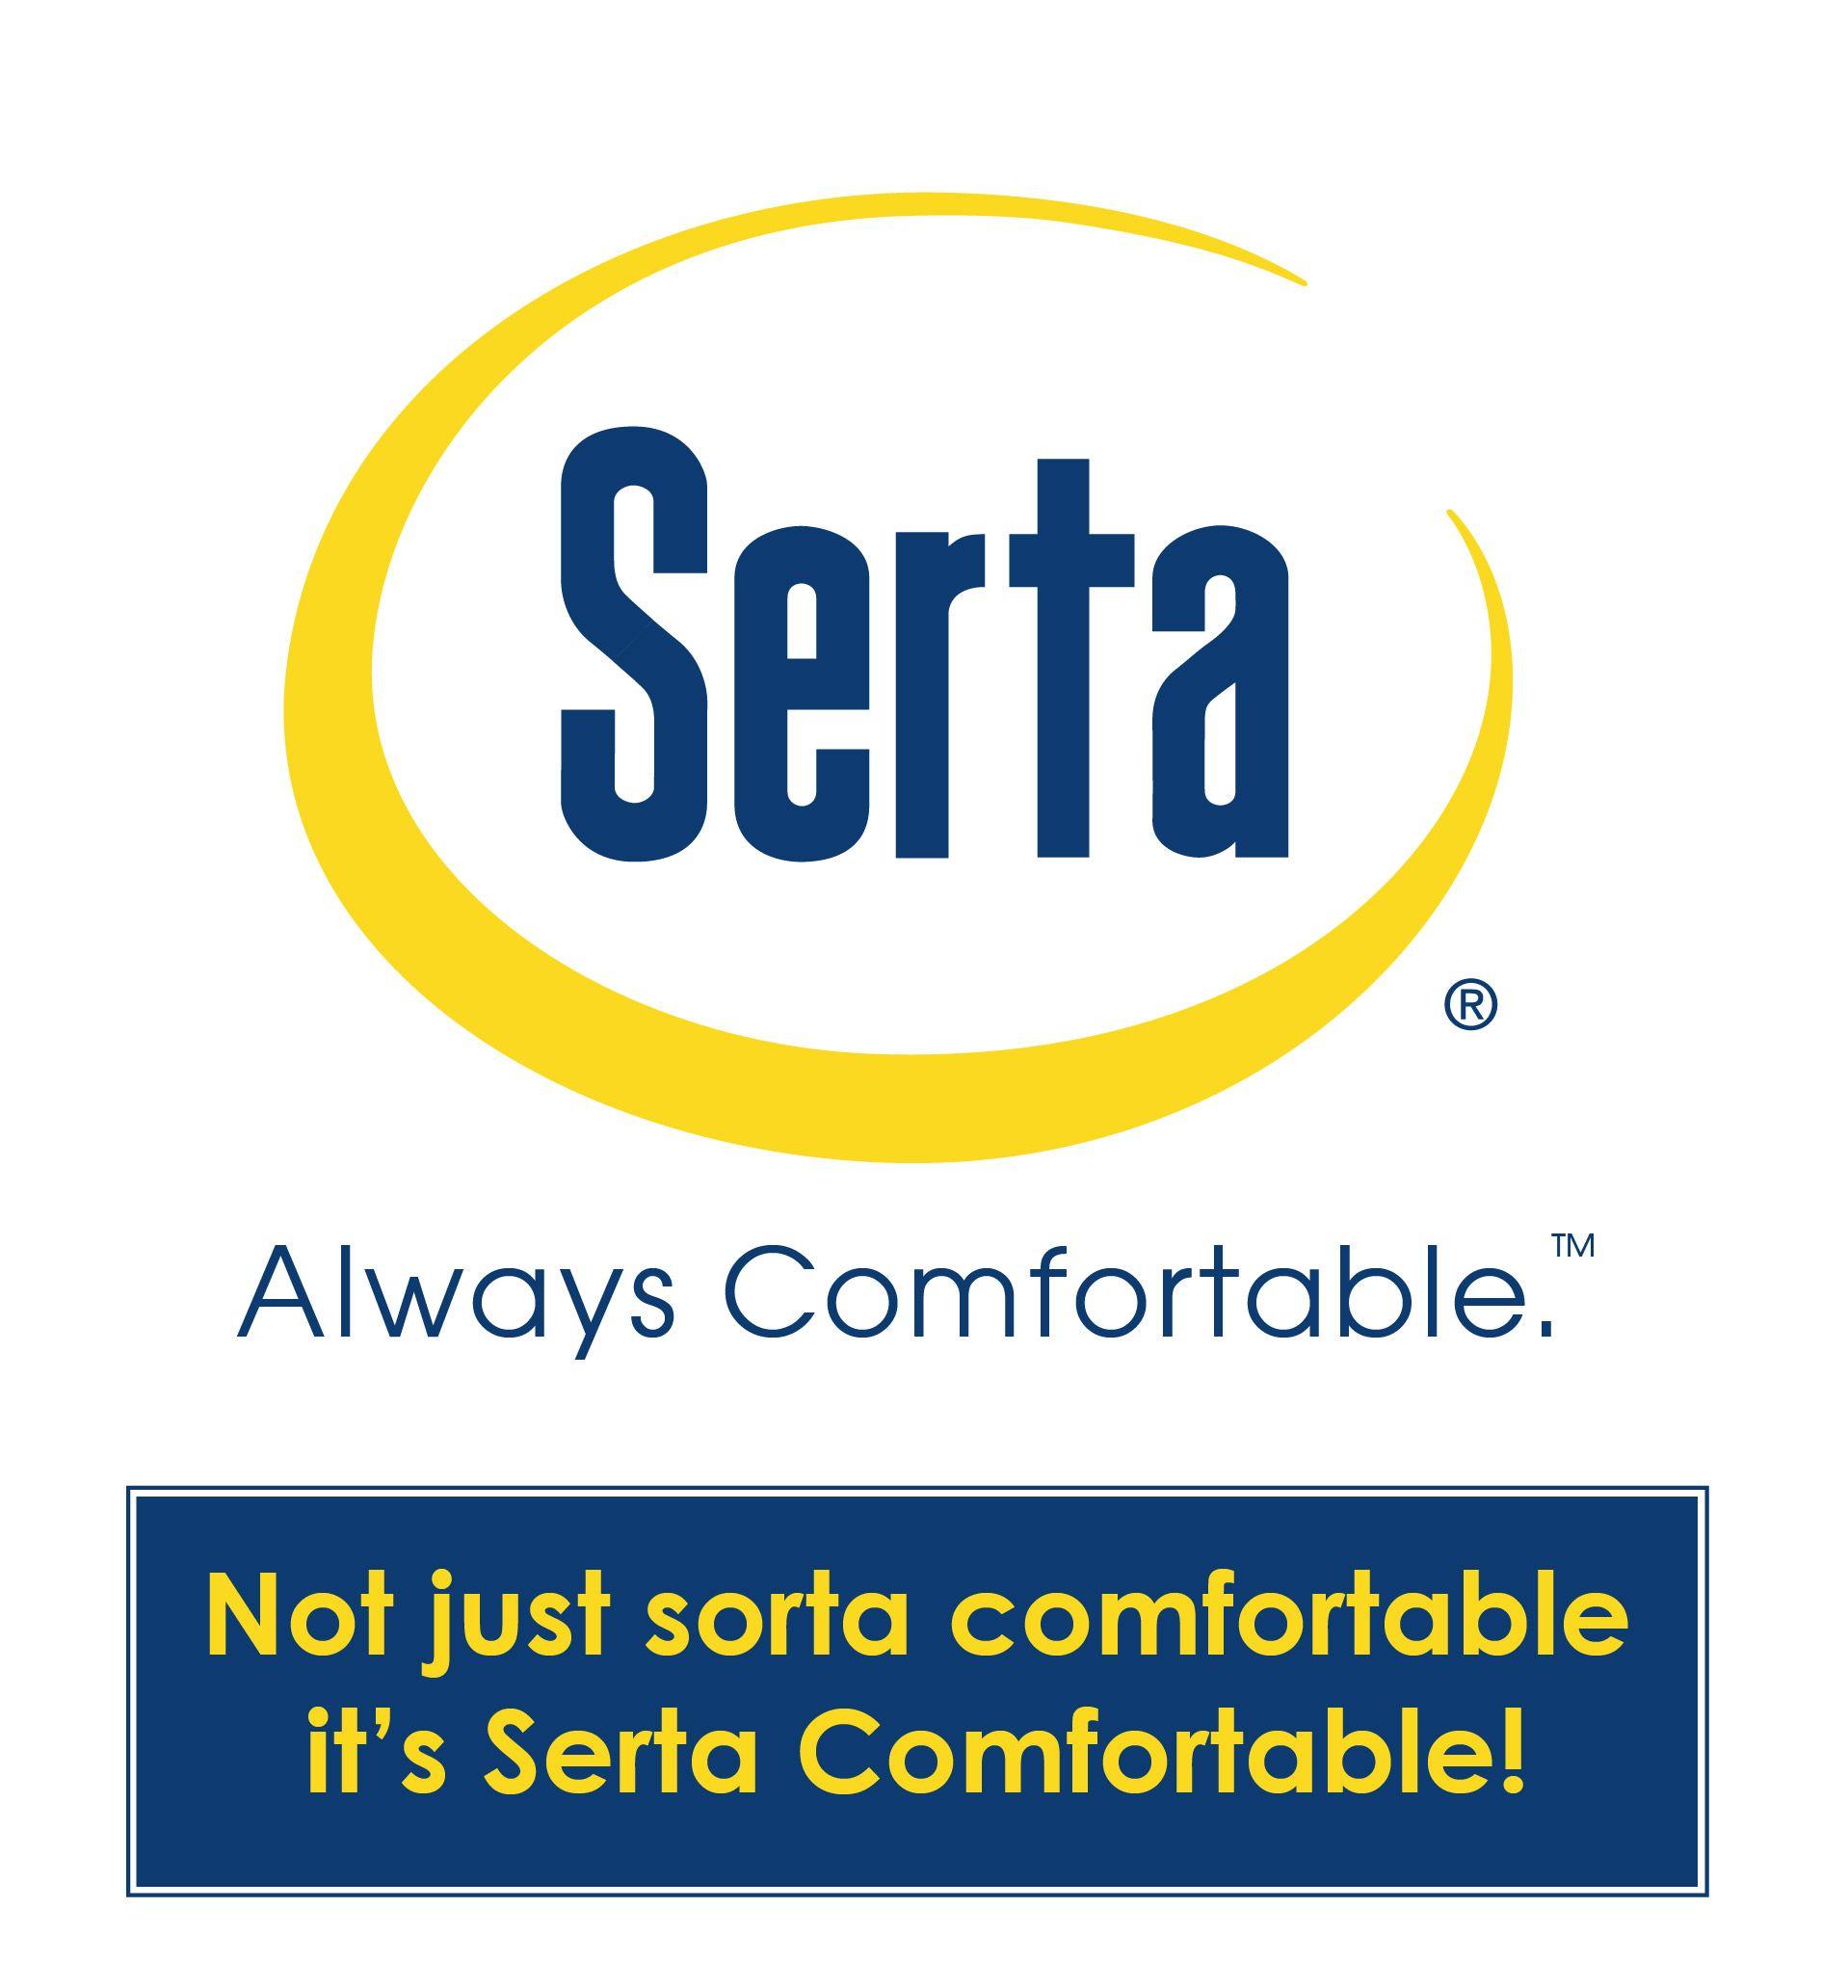 Serta Logo - Lifestyle Solutions - Furniture design and manufacturing